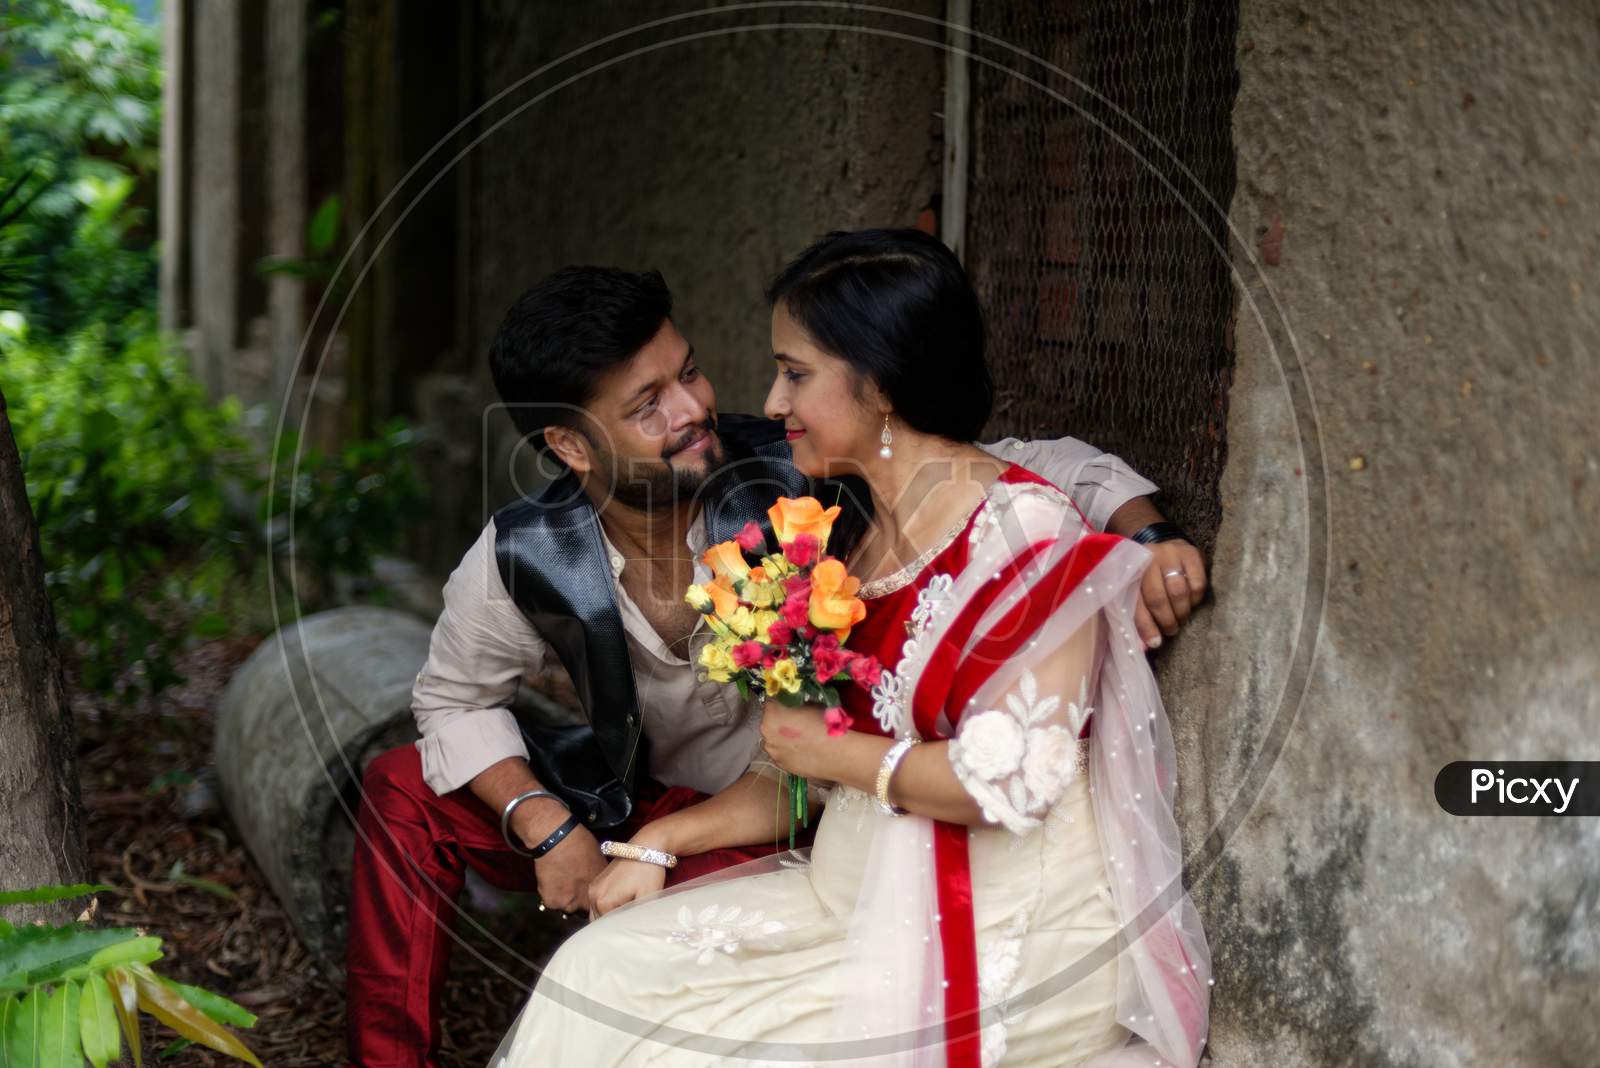 Young and attractive Indian Bengali brunette couple sharing romantic moments in front of a vintage house window wearing Indian traditional ethnic cloths. Indian lifestyle and fashion